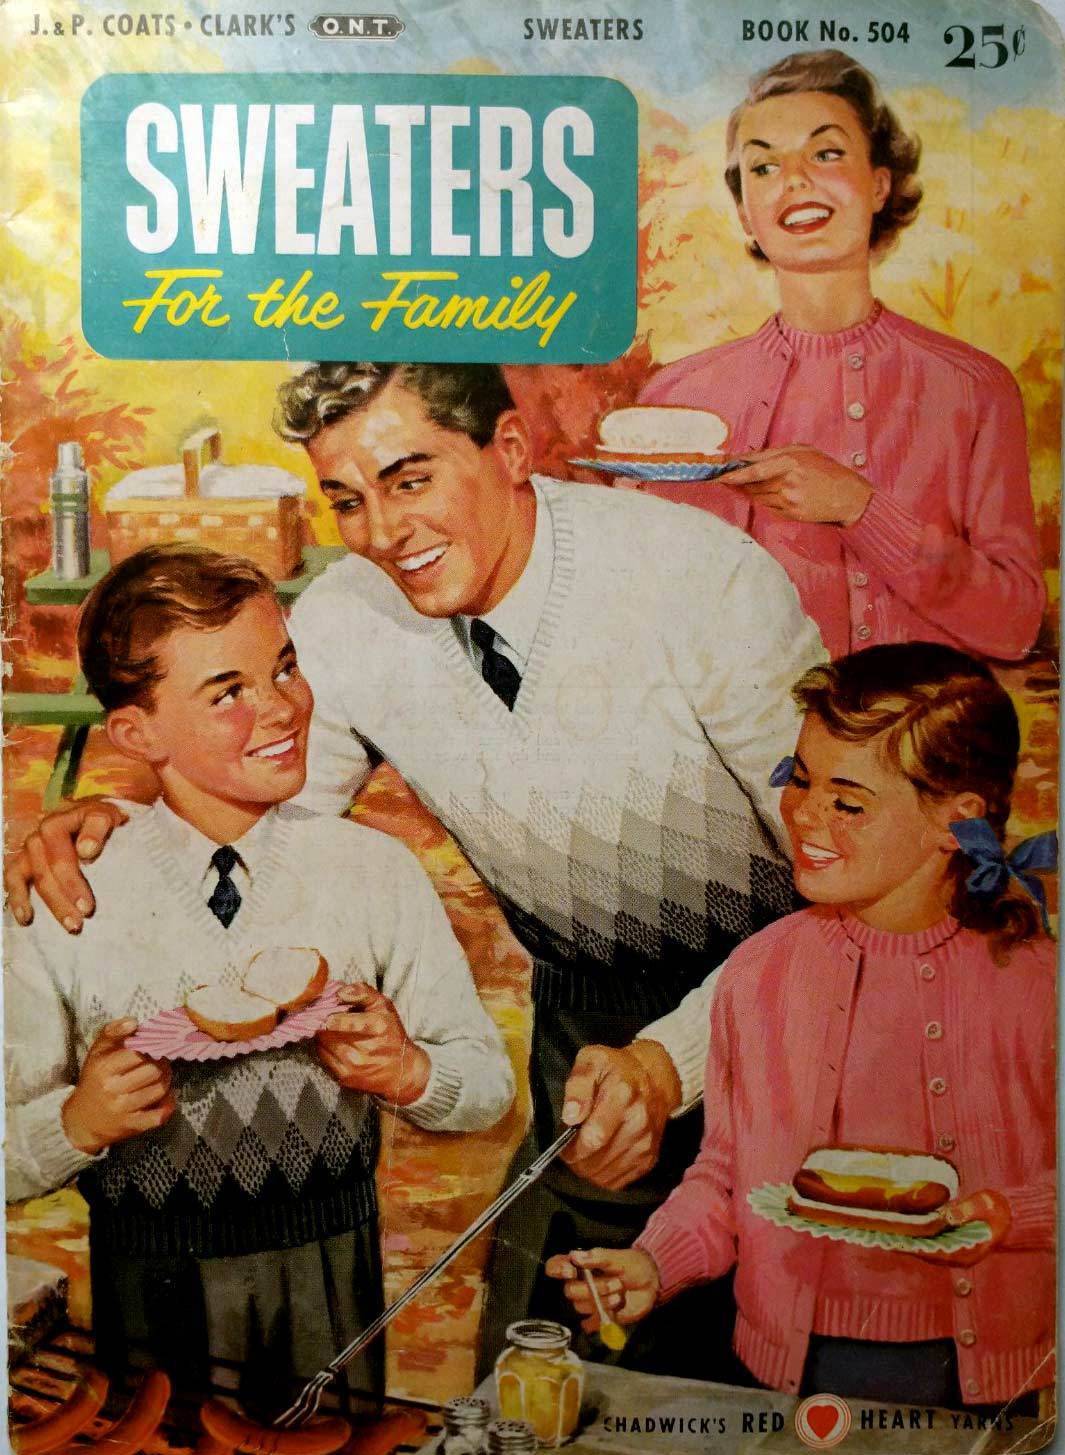 Sweaters For The Family / Coats and Clark #504 / 1953 Knitting Patterns - $5.69